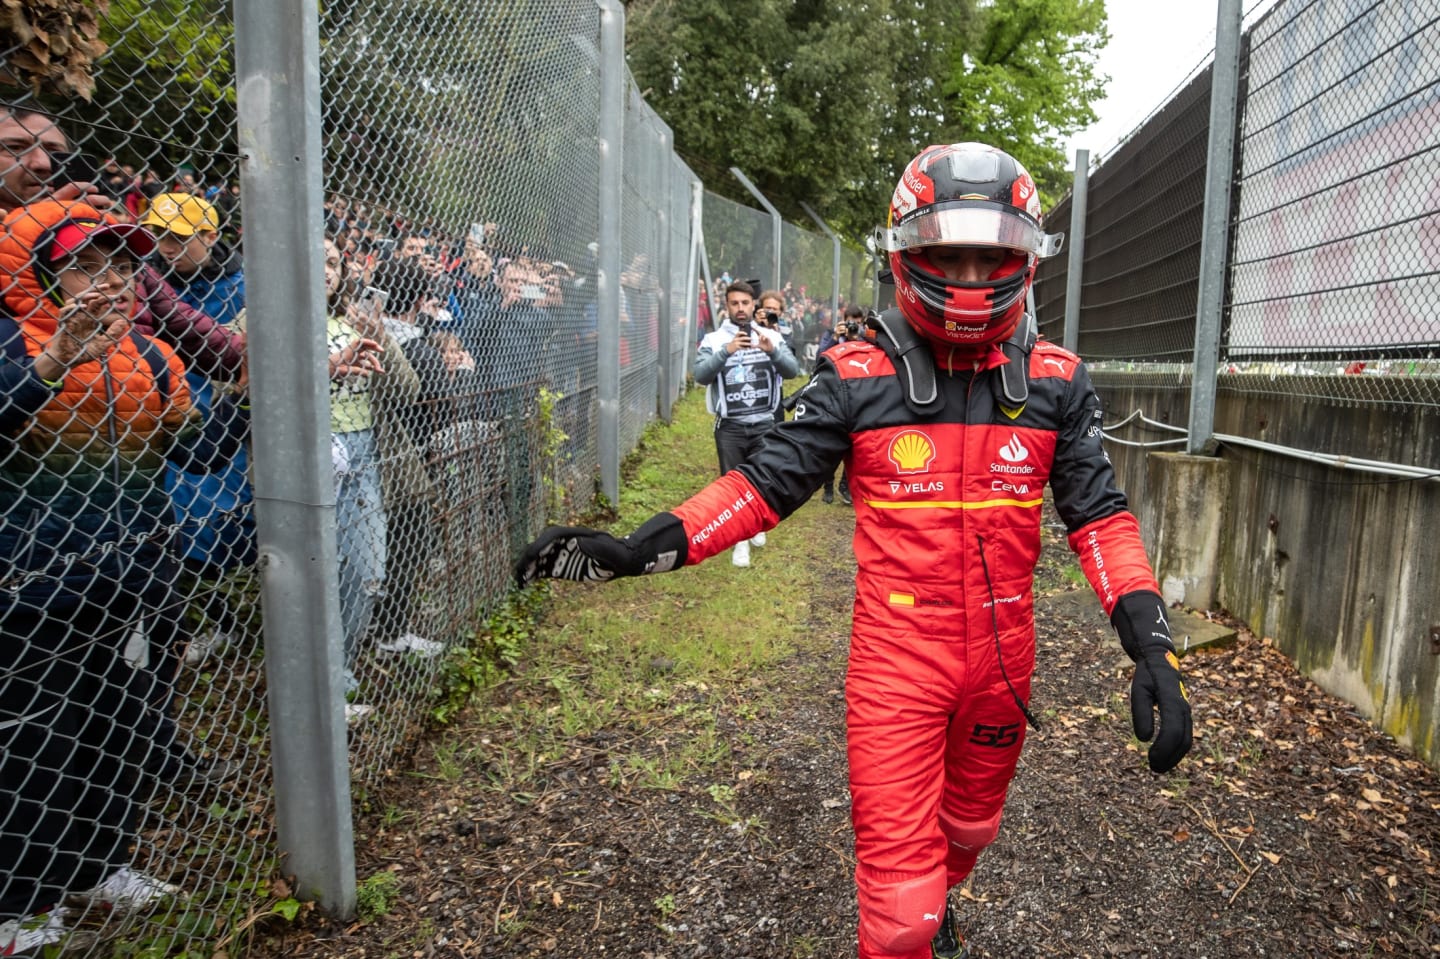 IMOLA, ITALY - APRIL 24: Carlos Sainz Jr. of Ferrari, who crashed out during the F1 Grand Prix of